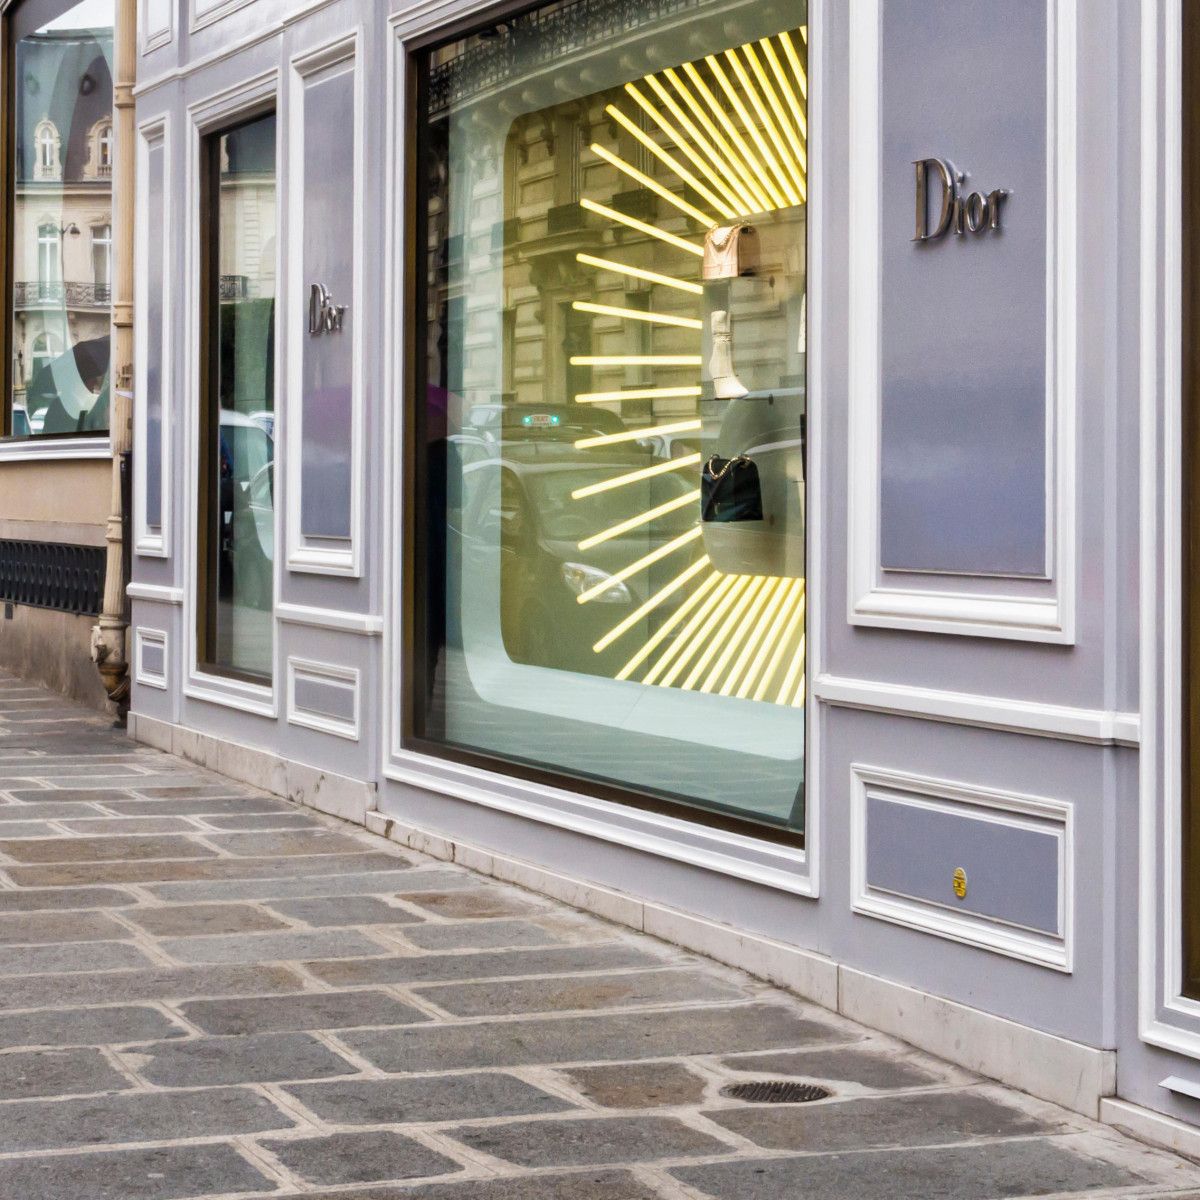 9 of the Best Women's Clothing Stores in Paris